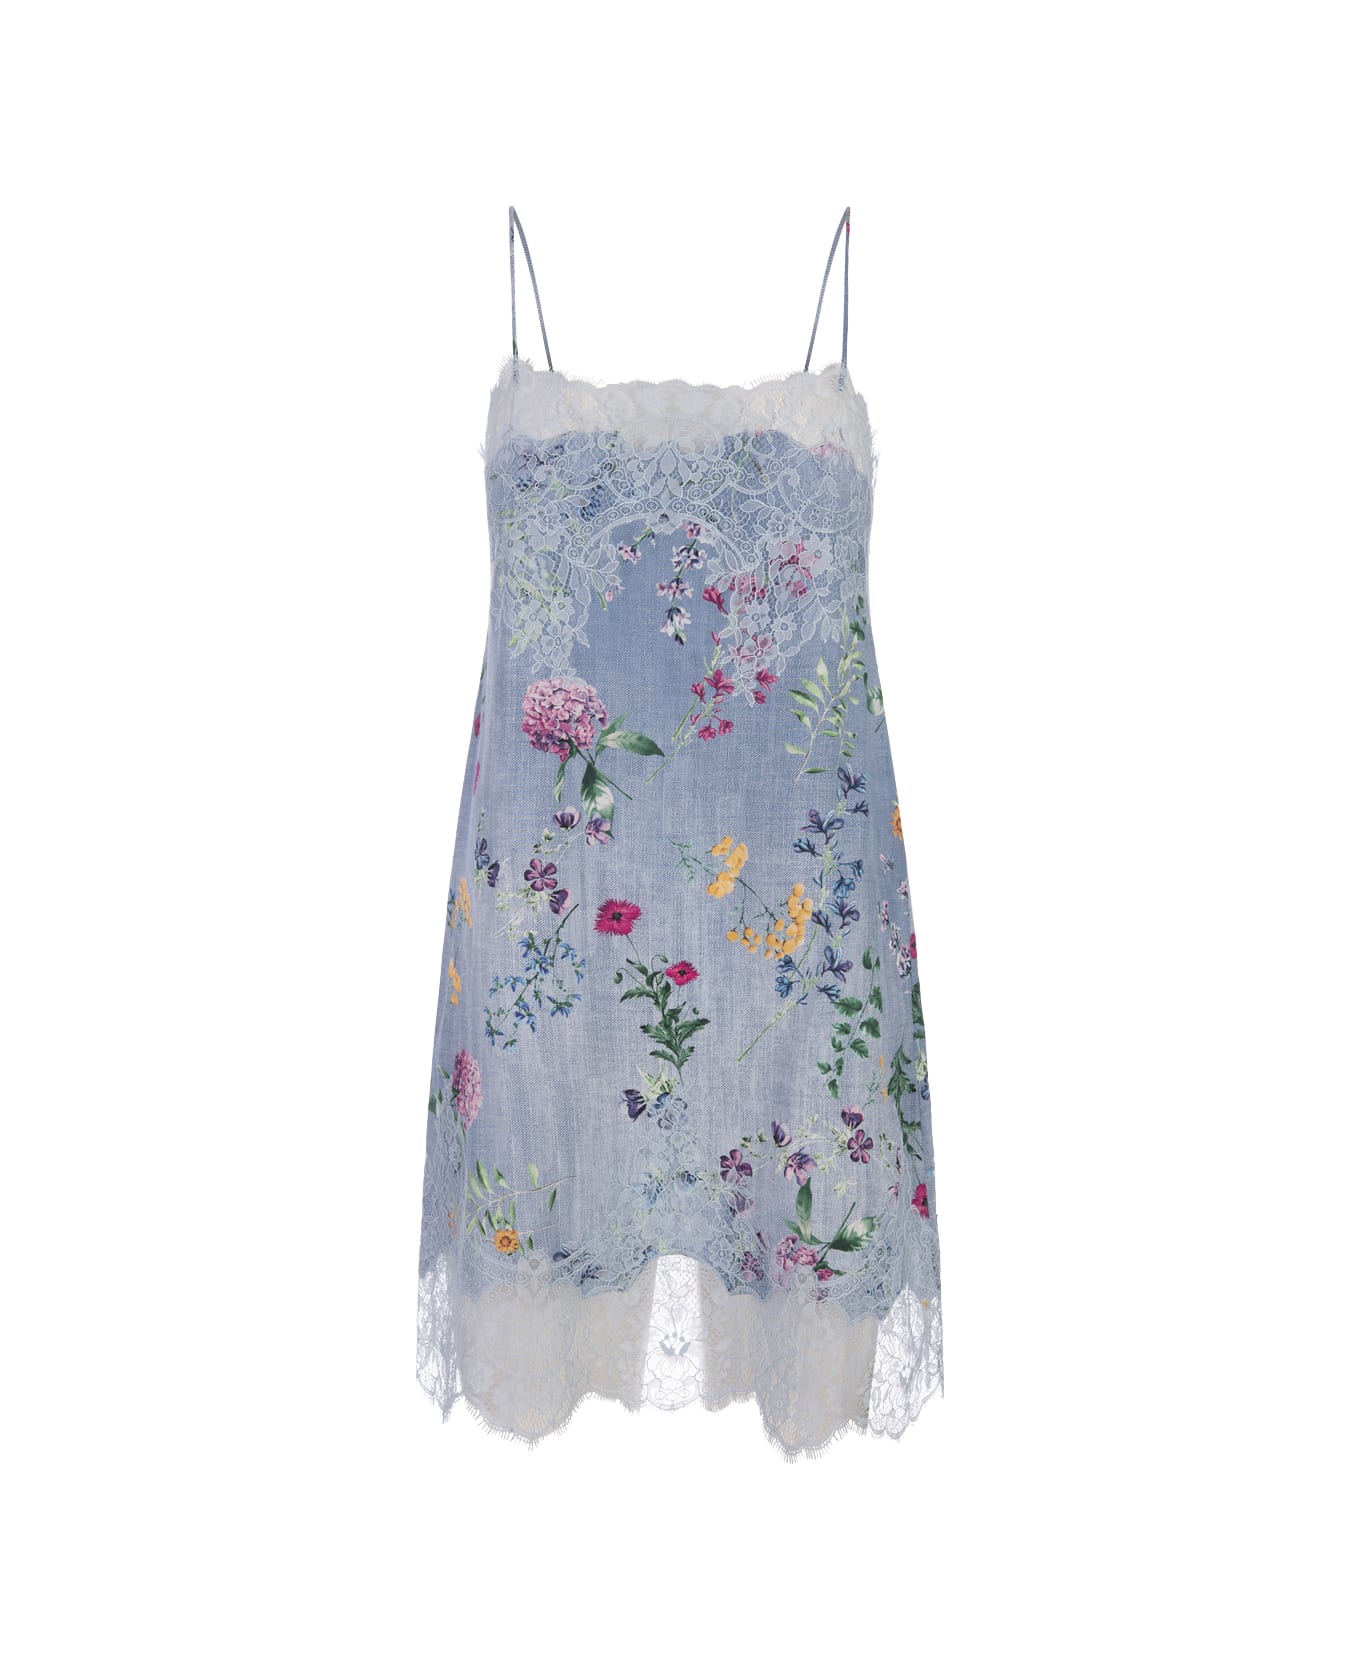 Ermanno Scervino Light Blue Lingerie Dress With Floral Print - Blue ランジェリー＆パジャマ